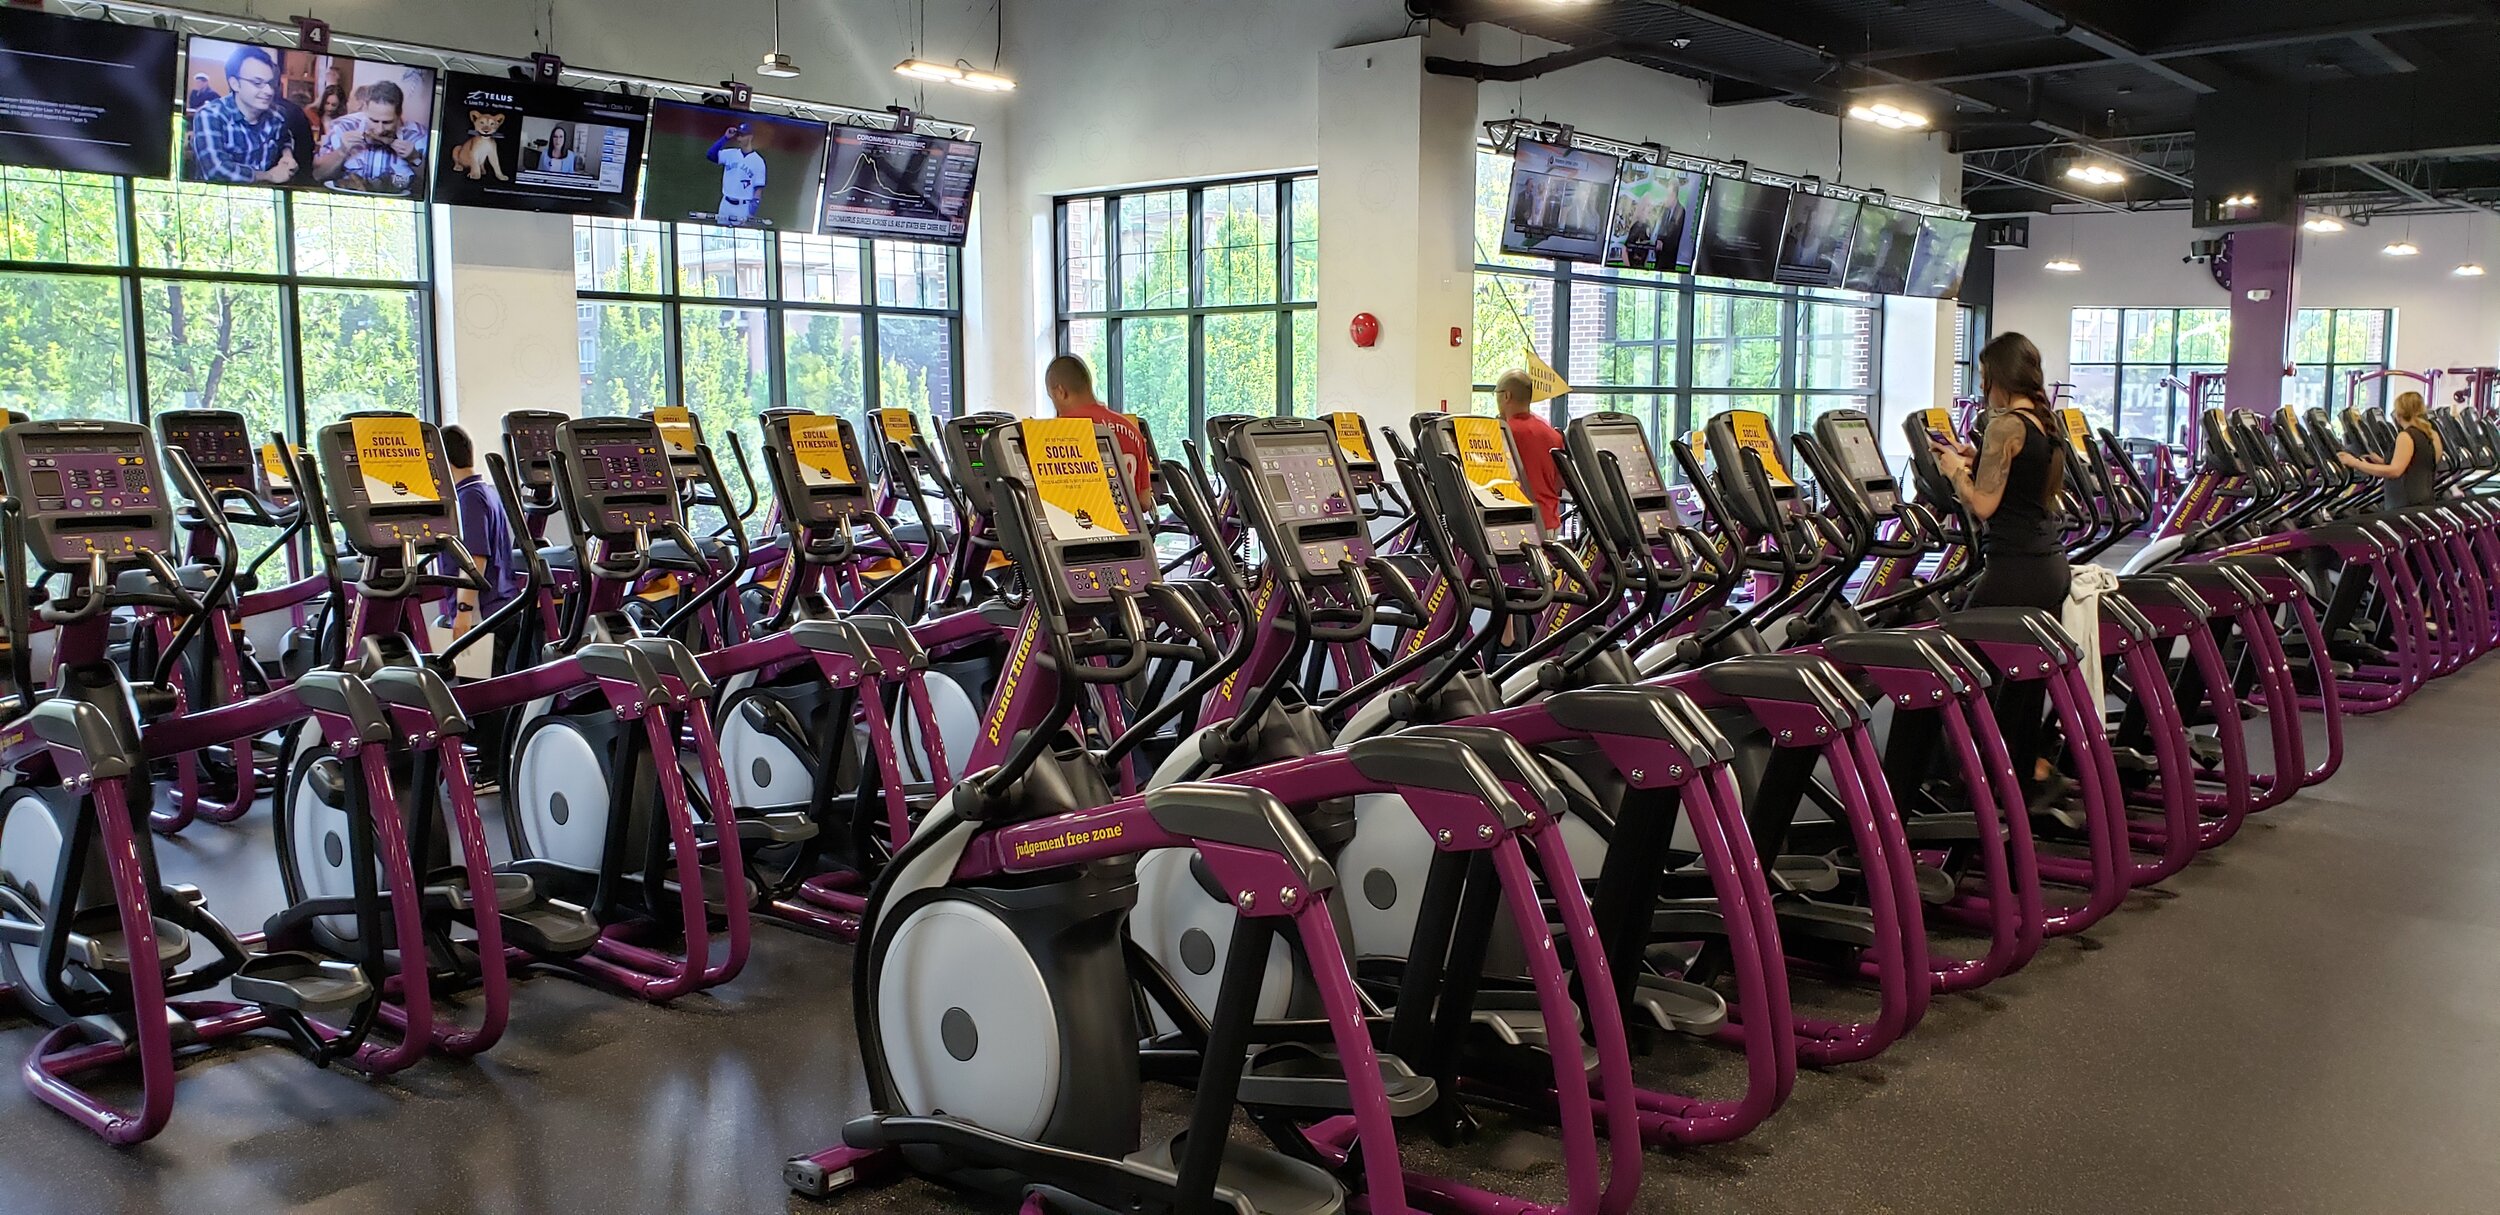  Is there planet fitness in canada for Beginner